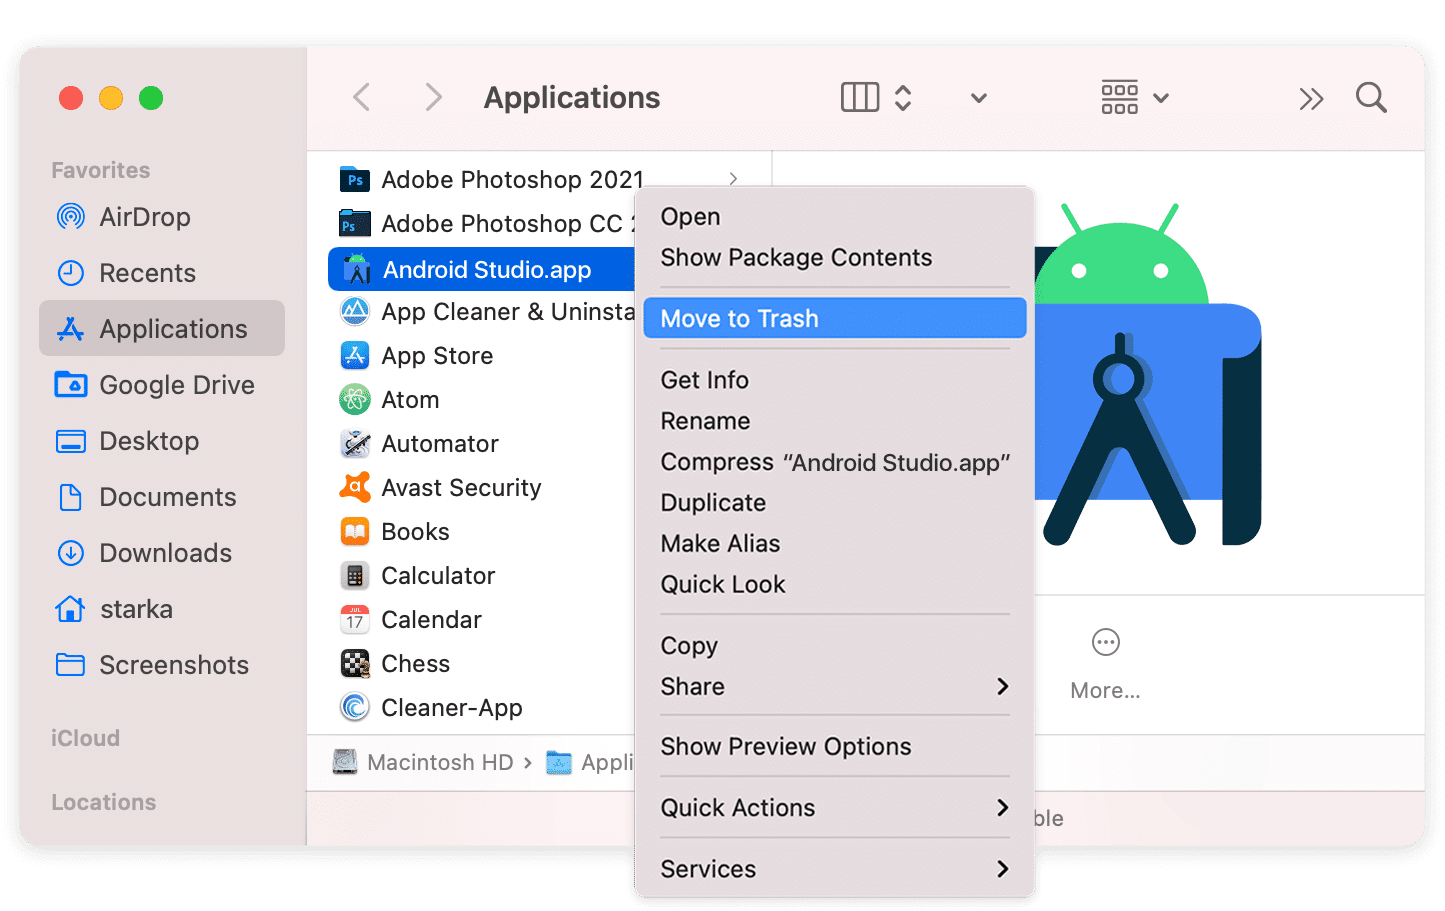 removing Android Studio from the Applications folder